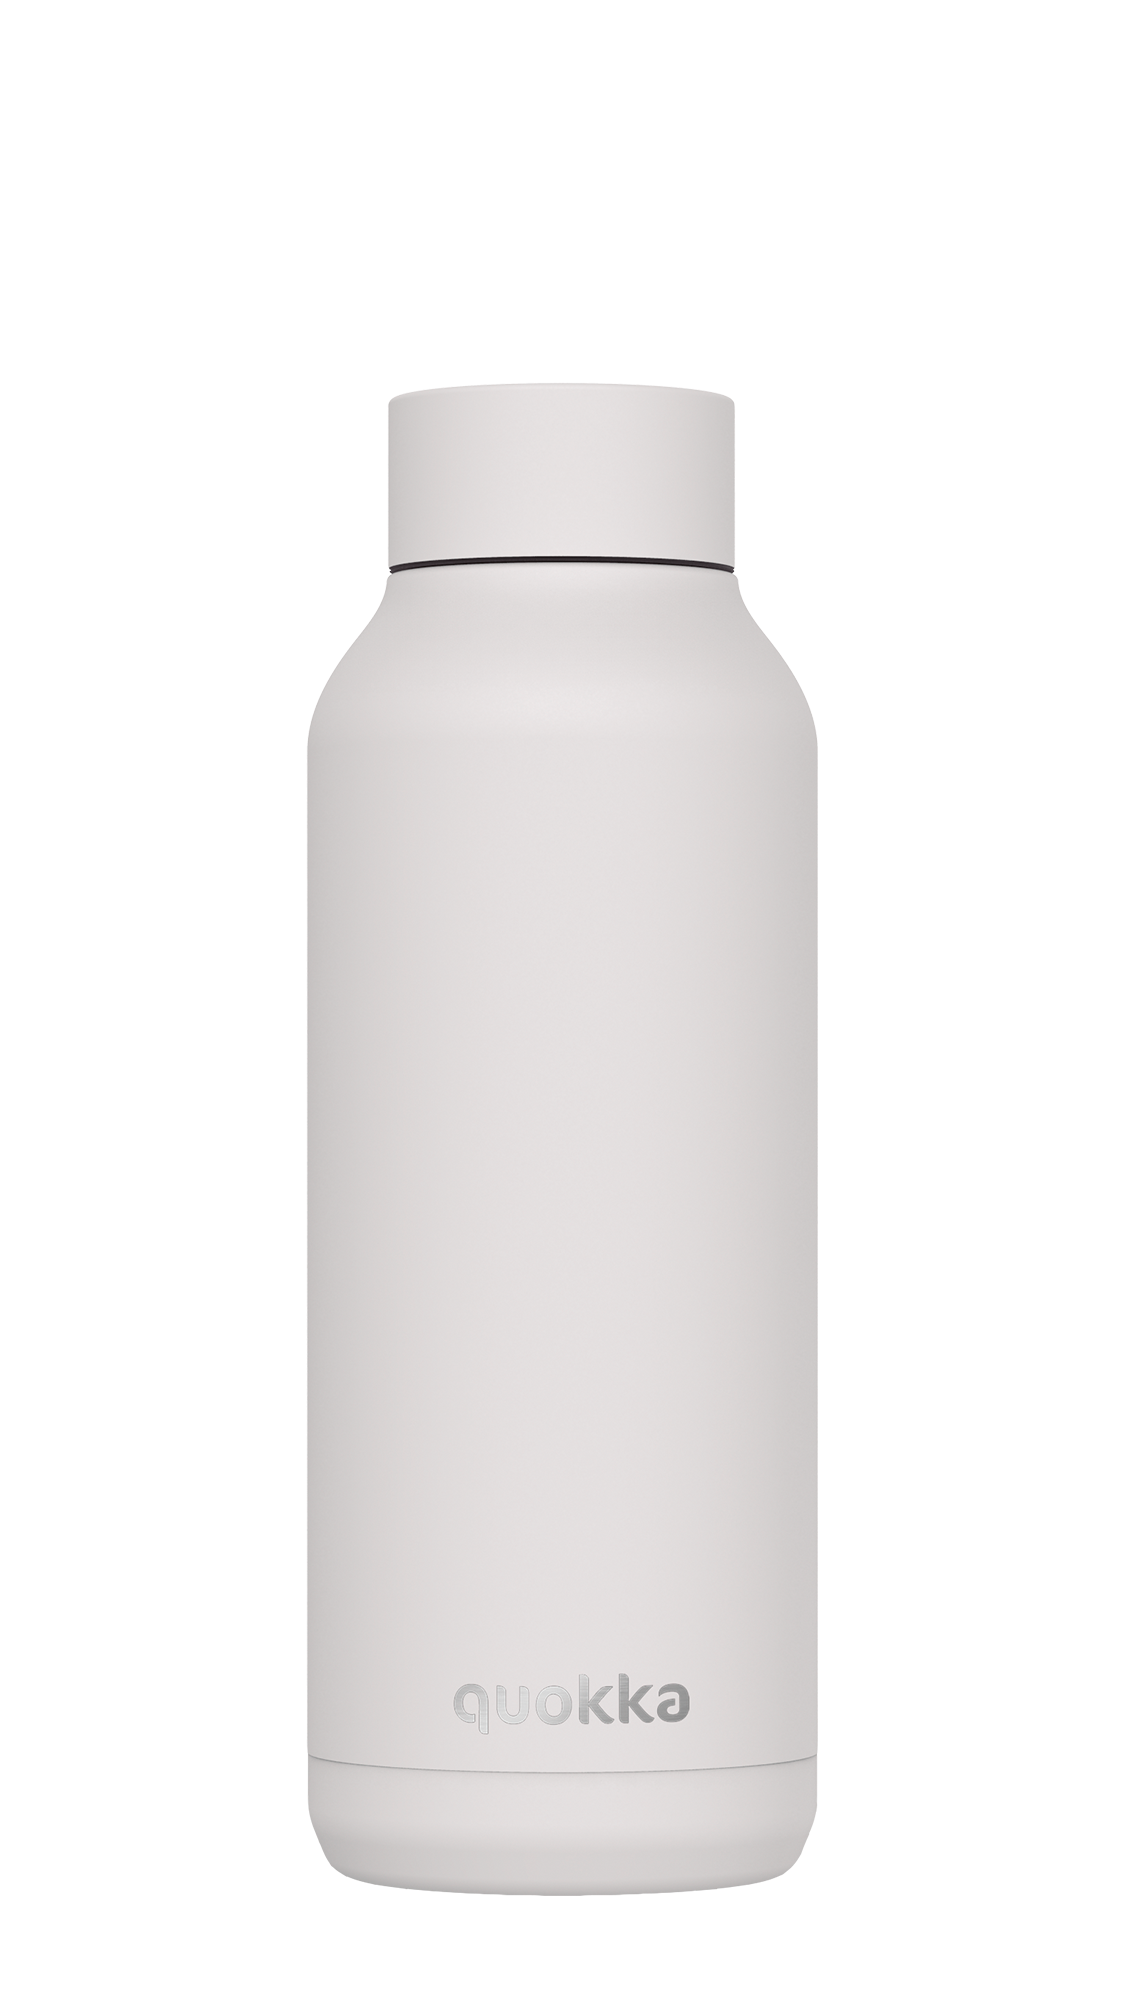 SOLID - WHITE 510 ML